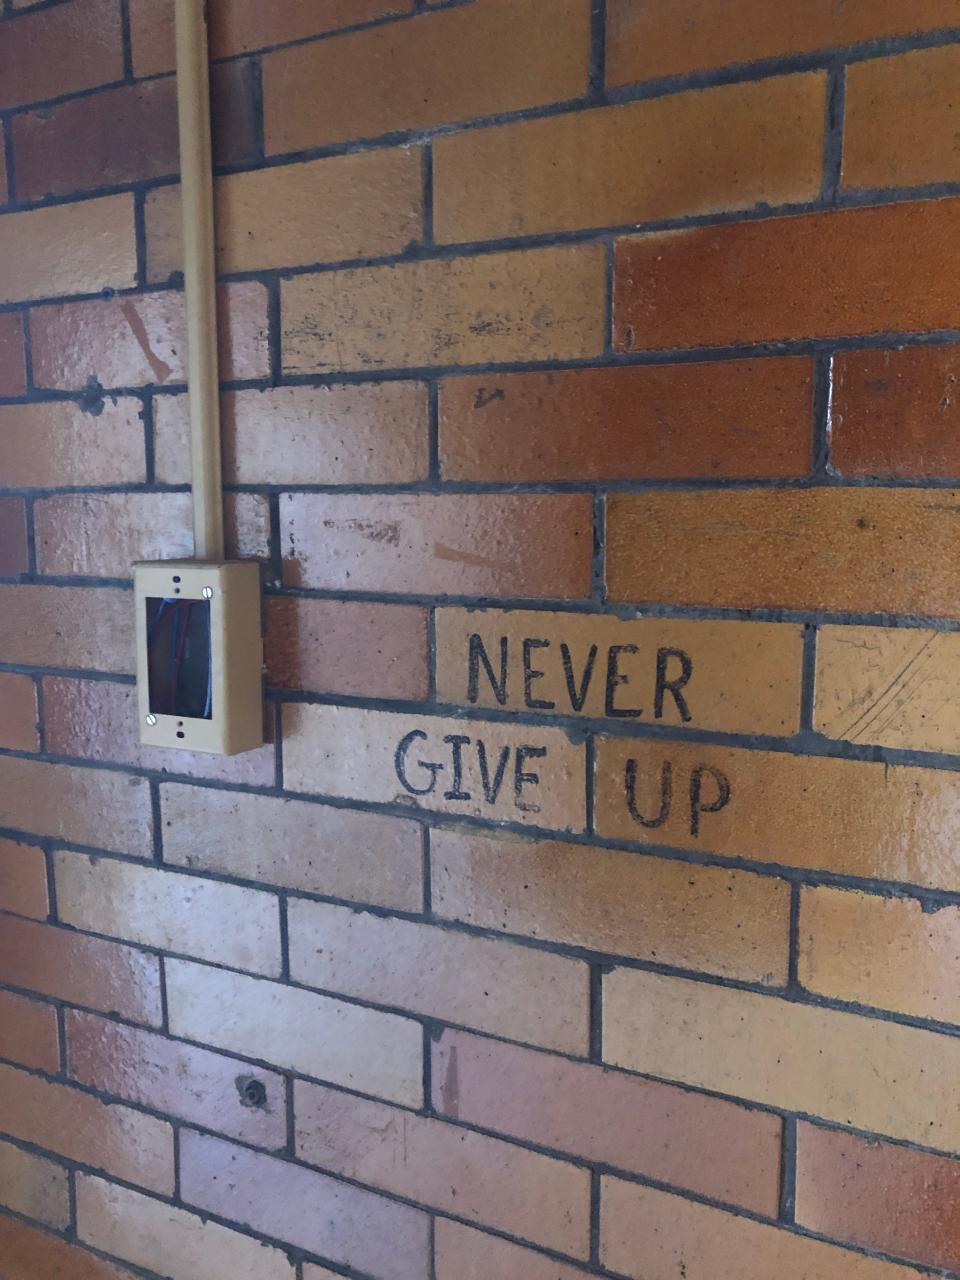 "Never Give Up" is written on a wall inside the former North Lincoln School in Alliance which is expected to be demolished. The school was built in 1914.